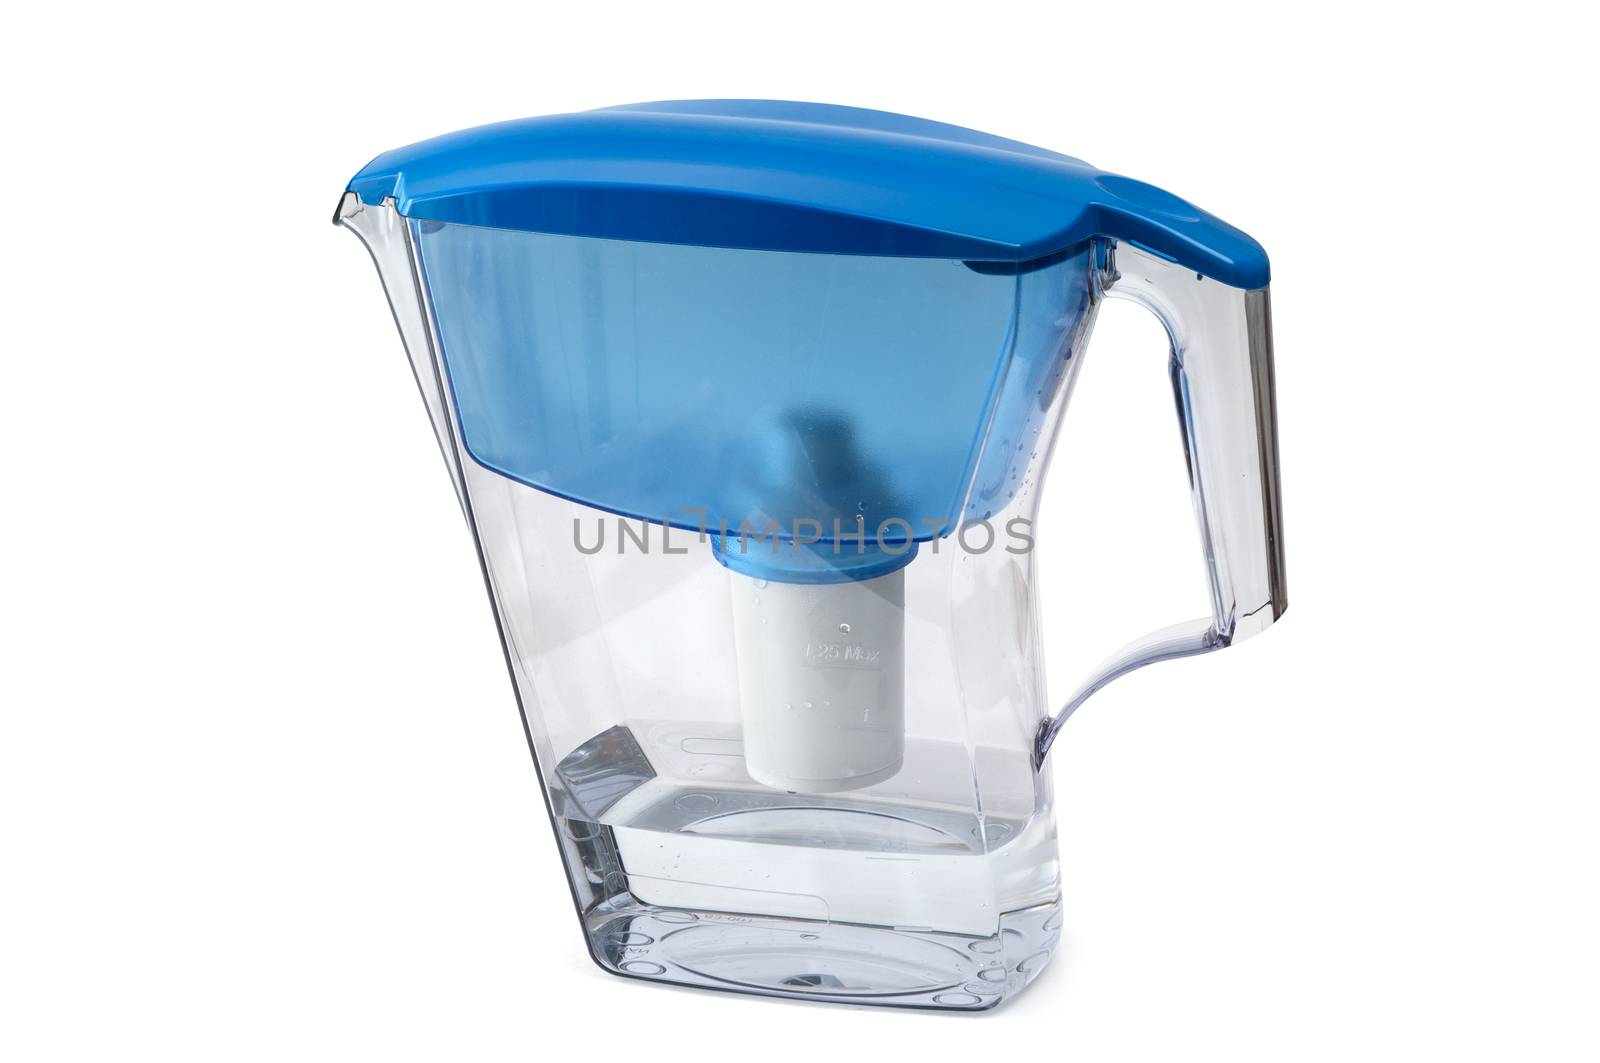 Blue water filter isolated on white background